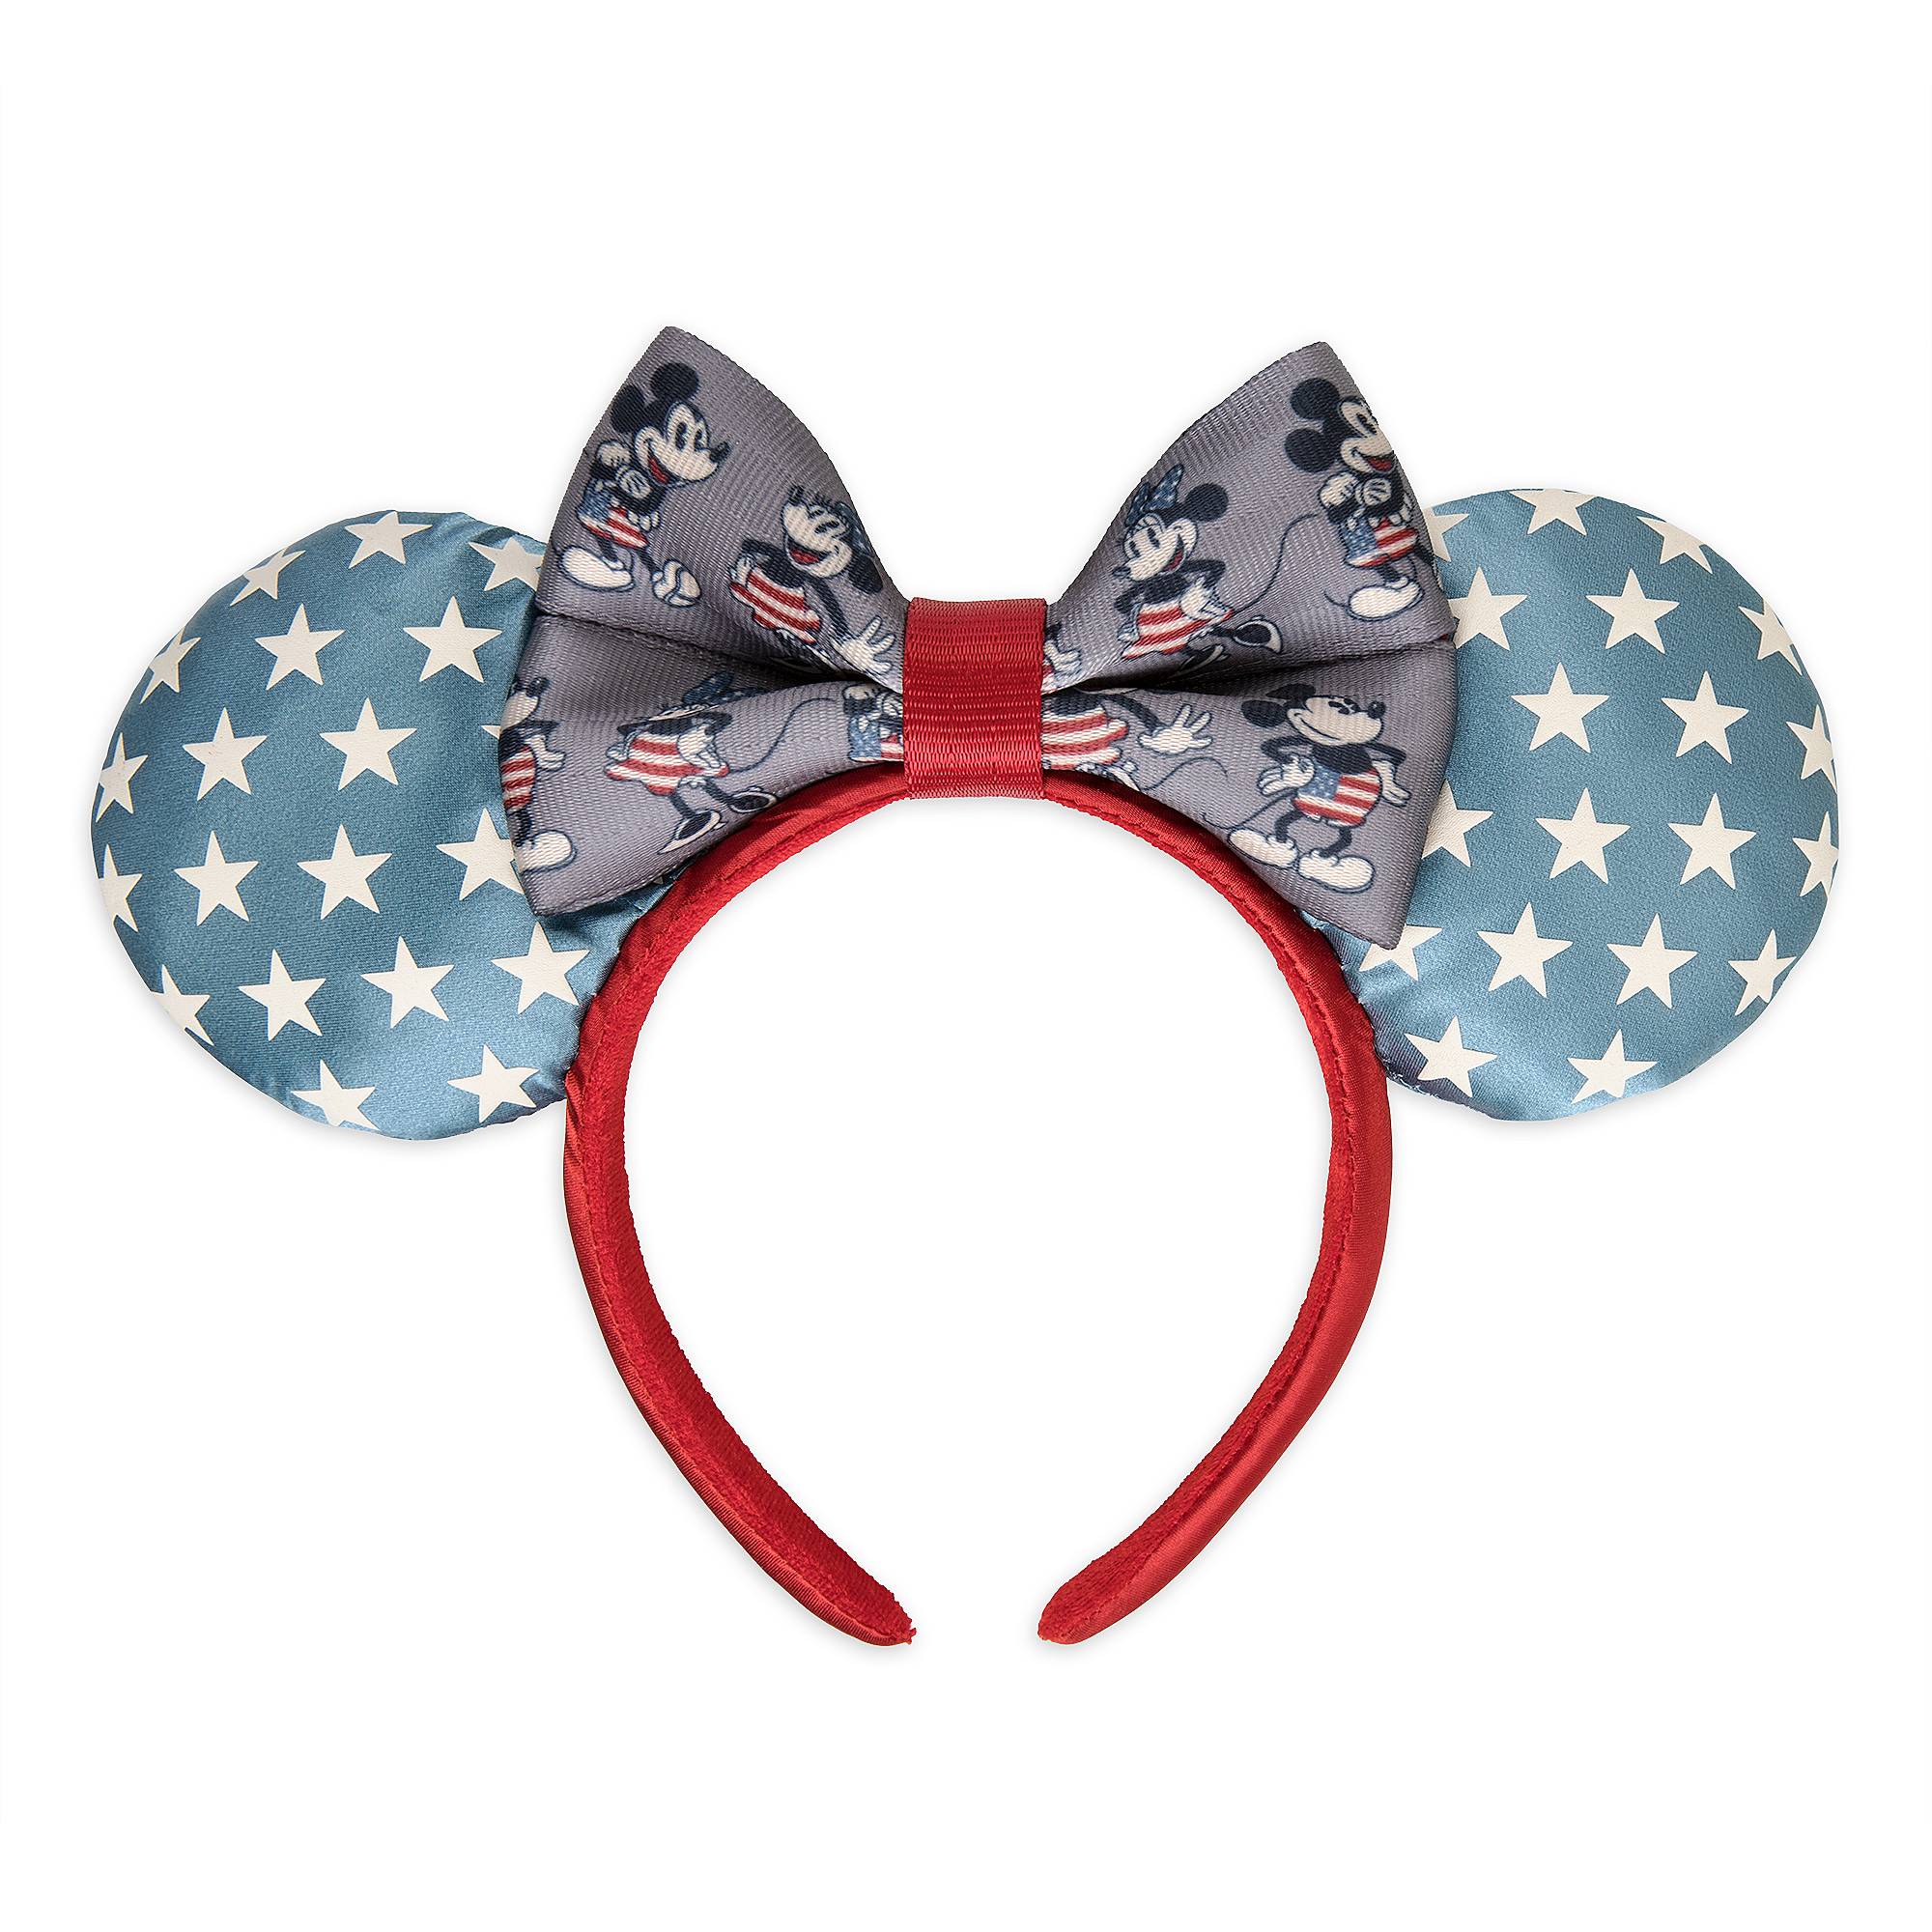 Mickey and Minnie Mouse Americana Ear Headband by Harveys - Limited Release image